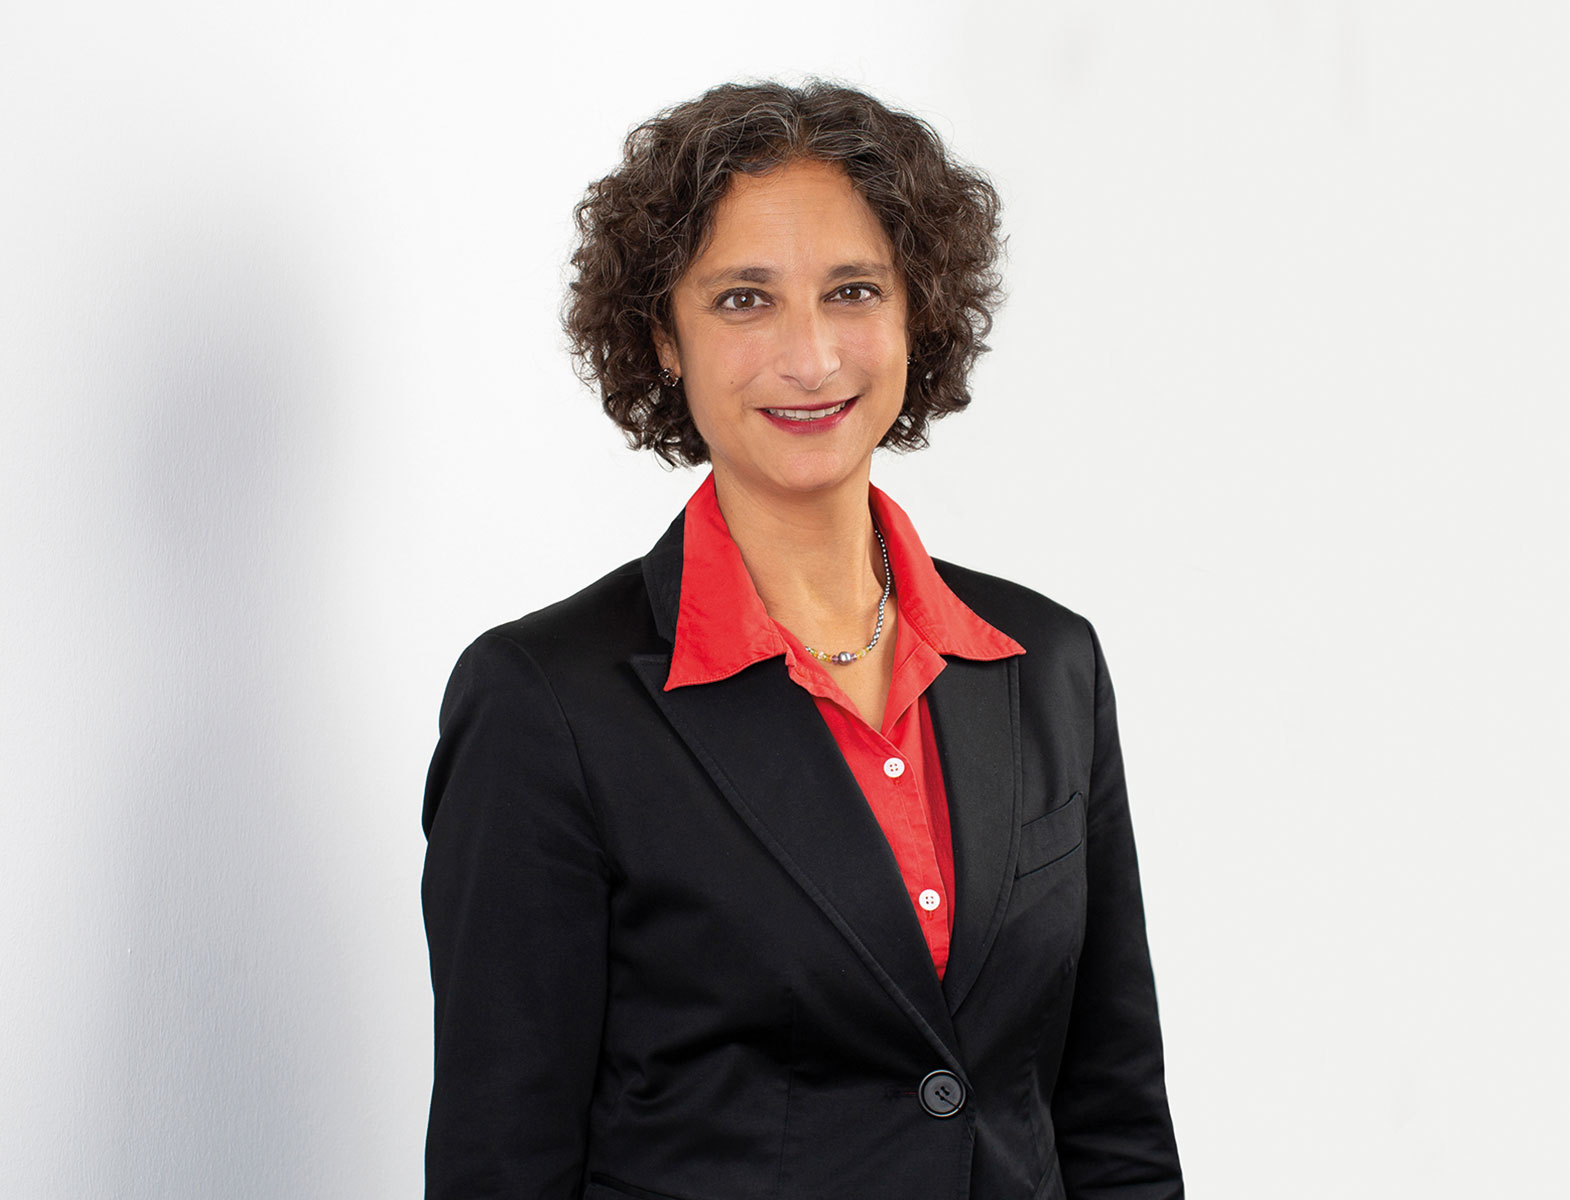 Three questions for… Dr. Angela Jain